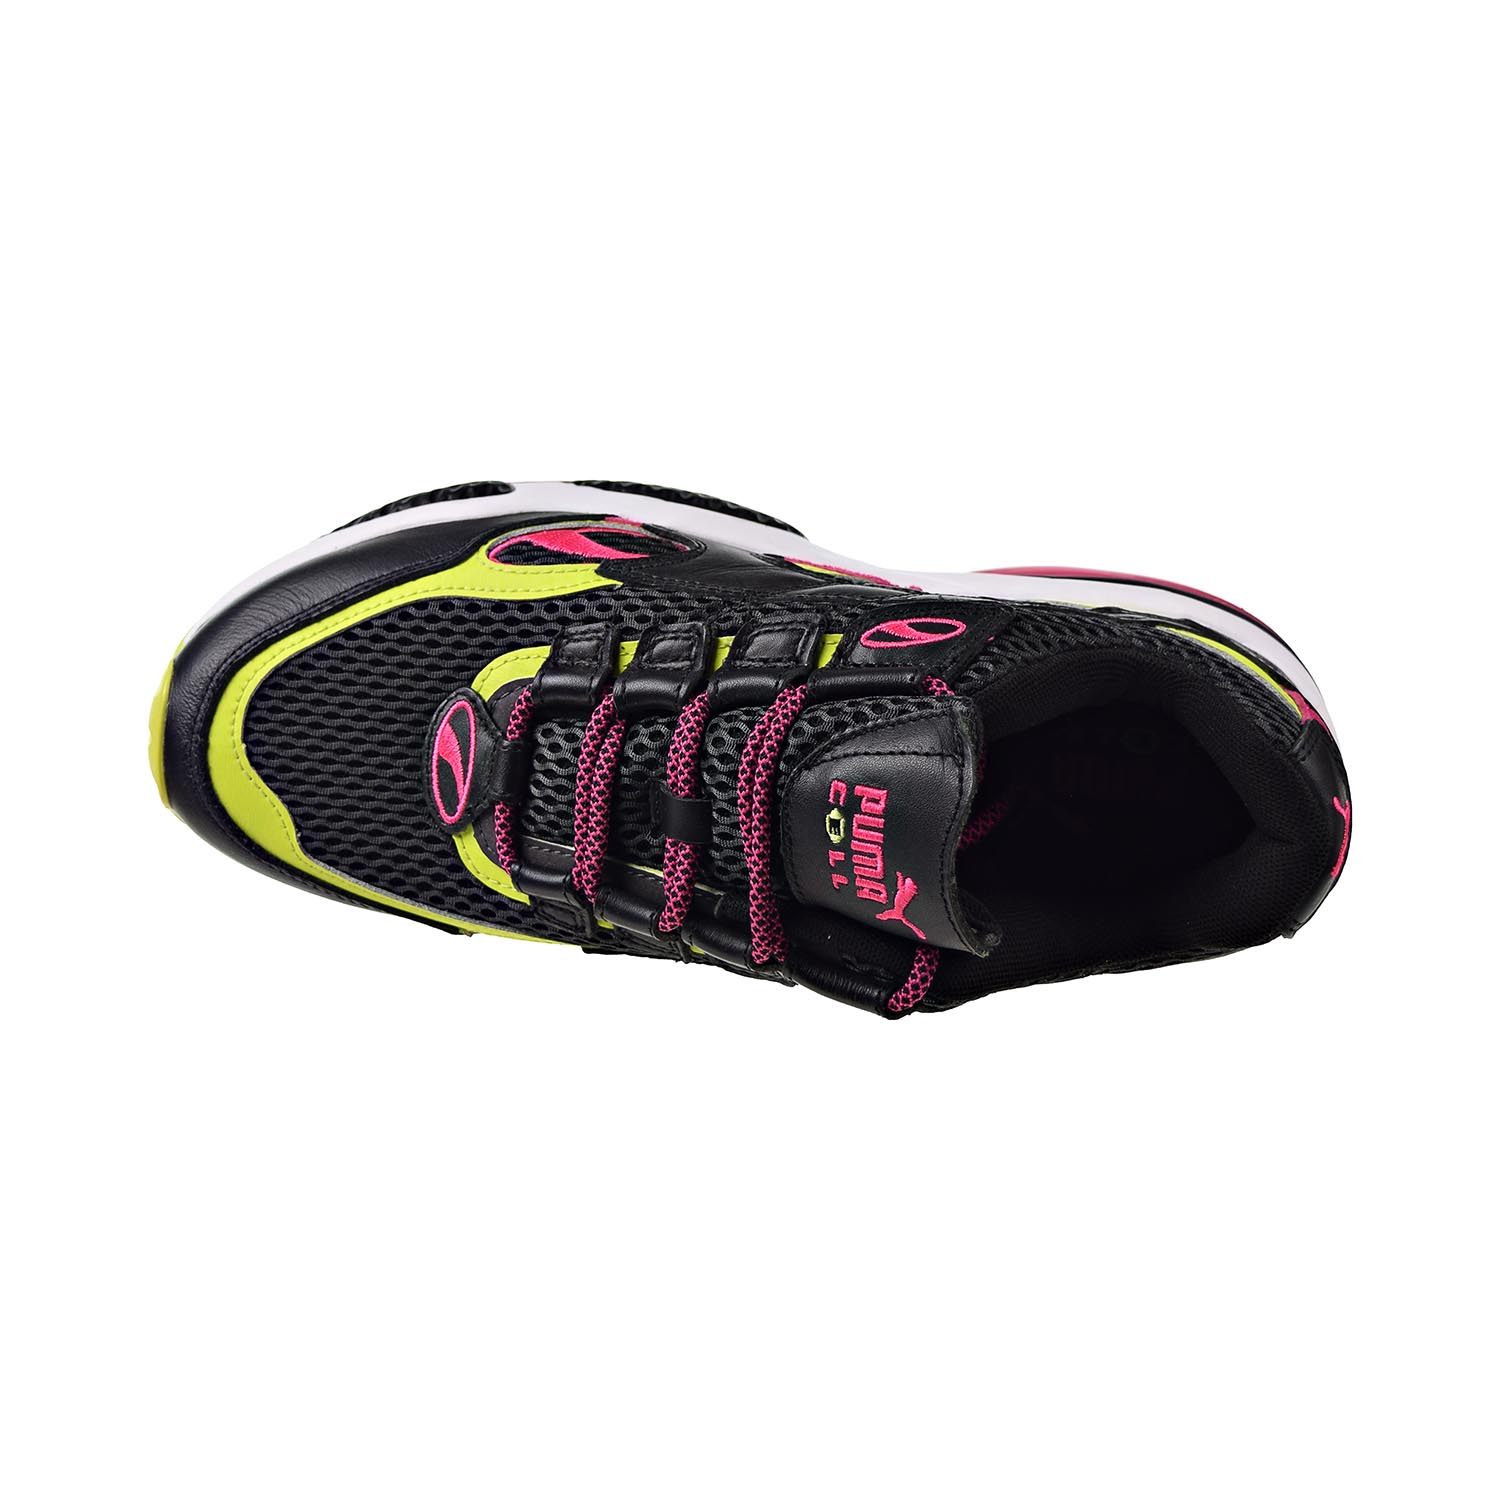 Puma Cell Venom 370417-01 Men Black/Pink/Lime Punch Athletic Running Shoes C1385 (10) - image 5 of 6